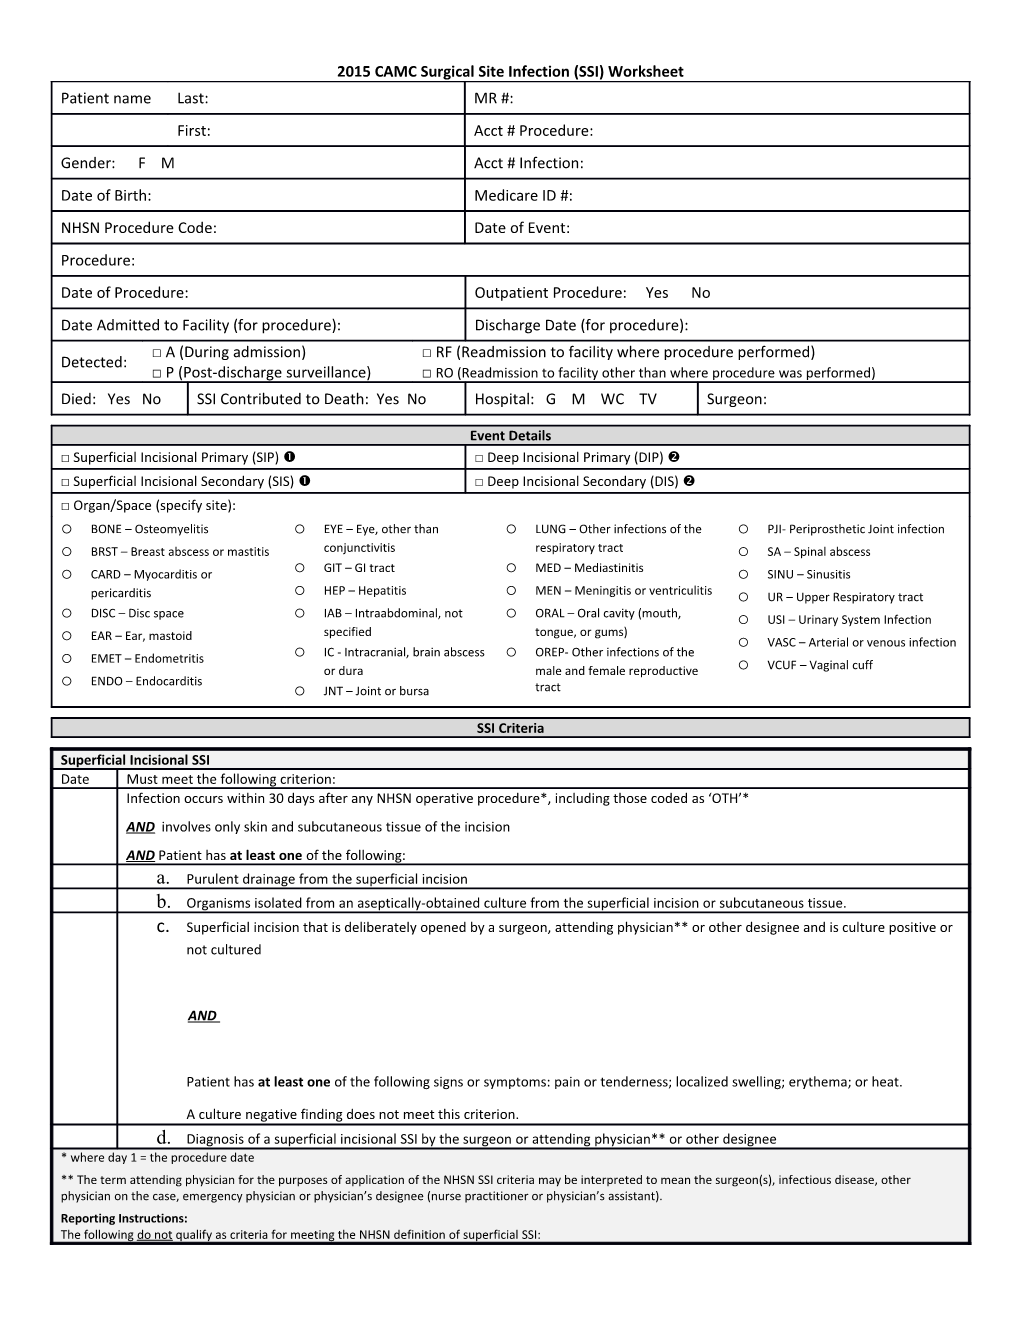 2015 CAMC Surgical Site Infection (SSI) Worksheet